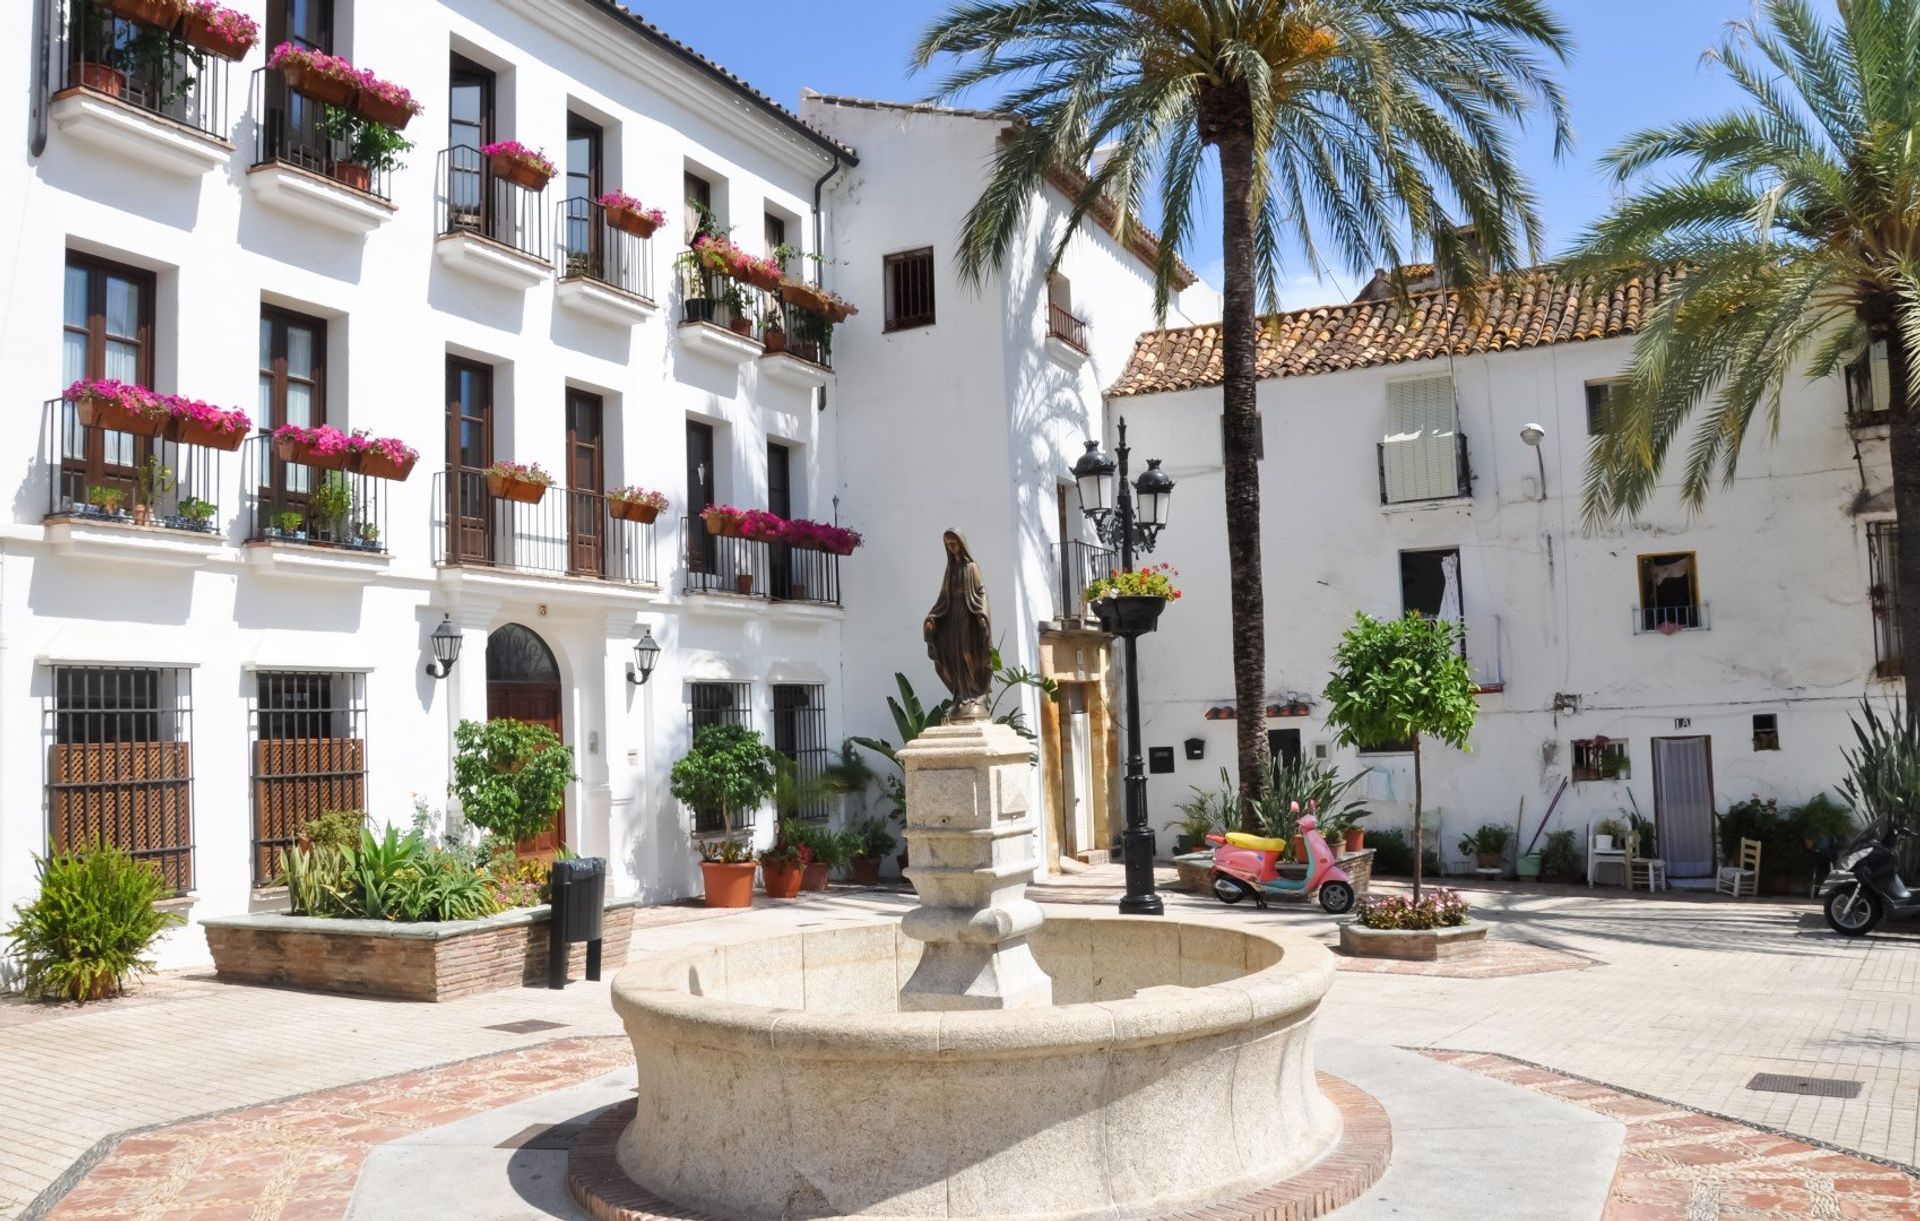 Take in the traditional Andalucian charm in the historic old quarter